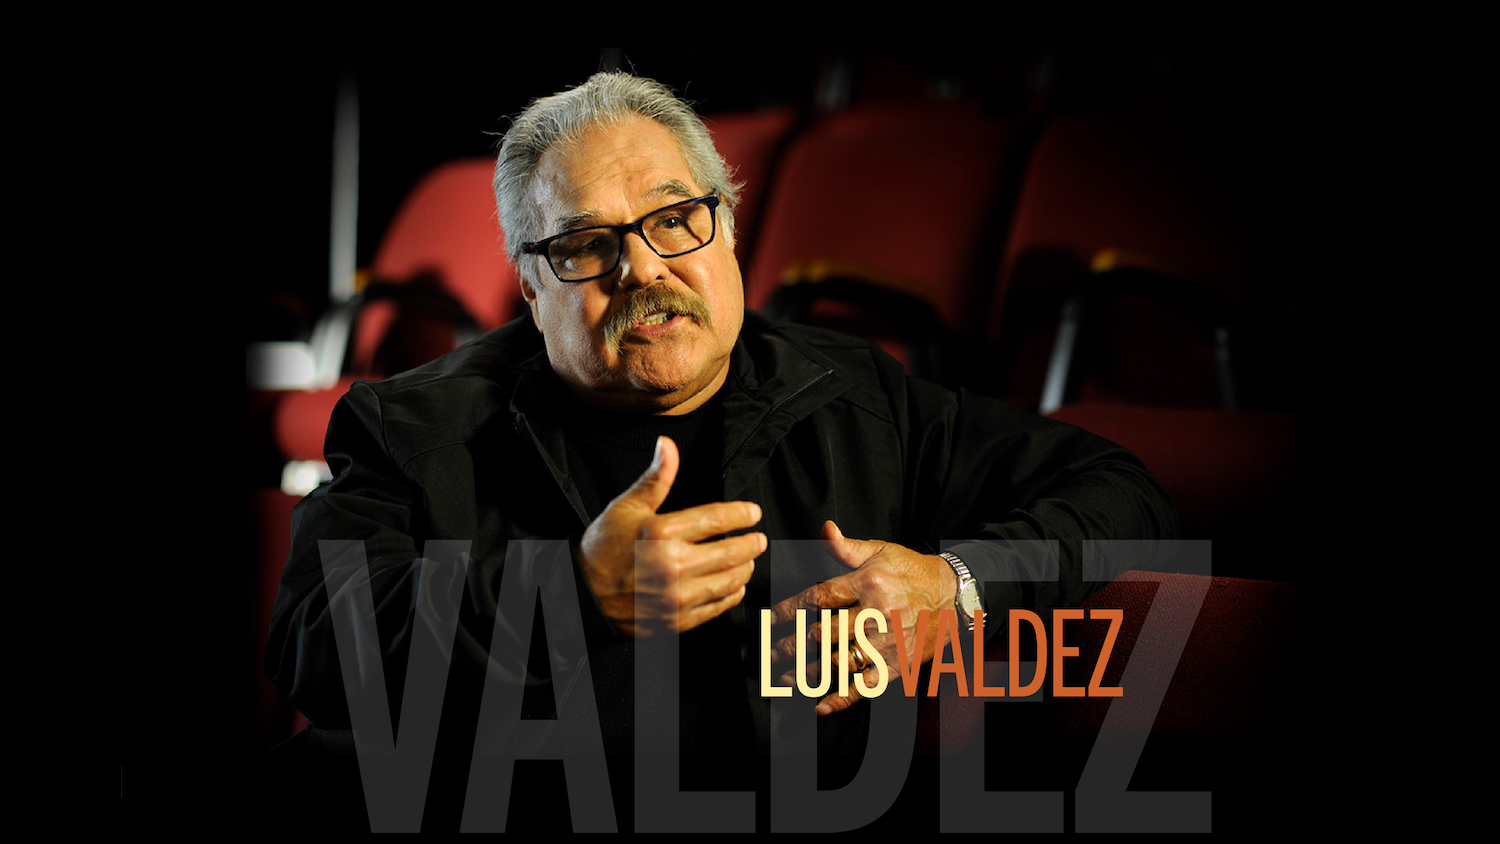 Luis Valdez photo of him speaking and gesturing with hands